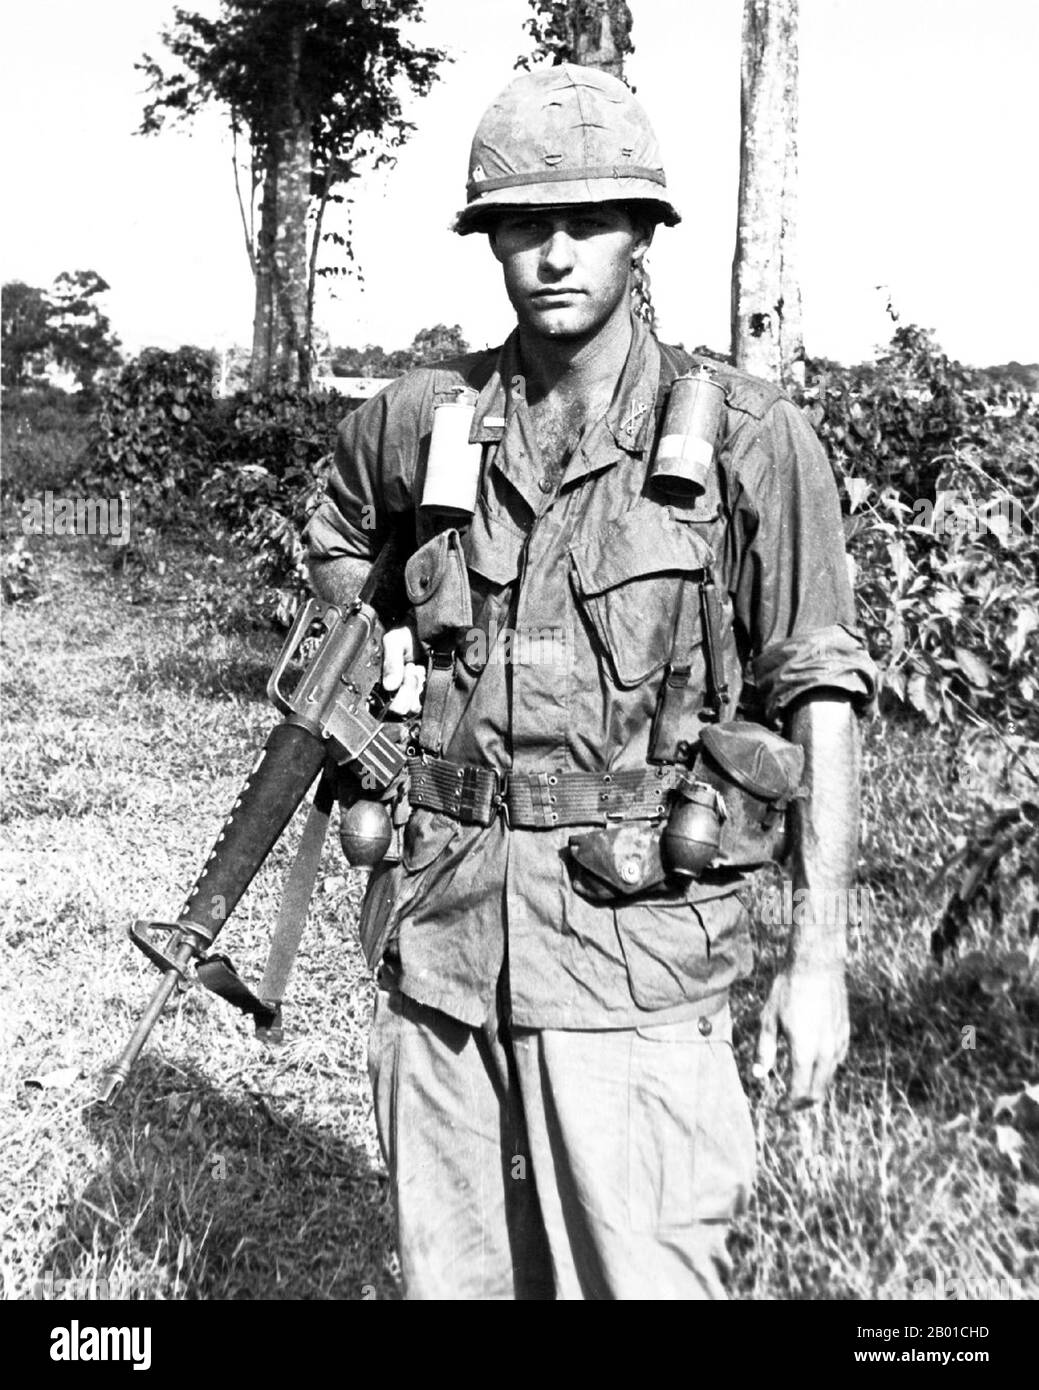 Vietnam: 1st LT Thomas K. Holland, D Troop, 1st Squadron, 9th Cavalry Division, c. 1966.  The Second Indochina War, known in America as the Vietnam War, was a Cold War era military conflict that occurred in Vietnam, Laos, and Cambodia from 1 November 1955 to the fall of Saigon on 30 April 1975. This war followed the First Indochina War and was fought between North Vietnam, supported by its communist allies, and the government of South Vietnam, supported by the U.S. and other anti-communist nations. The U.S. government viewed involvement in the war as a way to prevent a communist takeover. Stock Photo